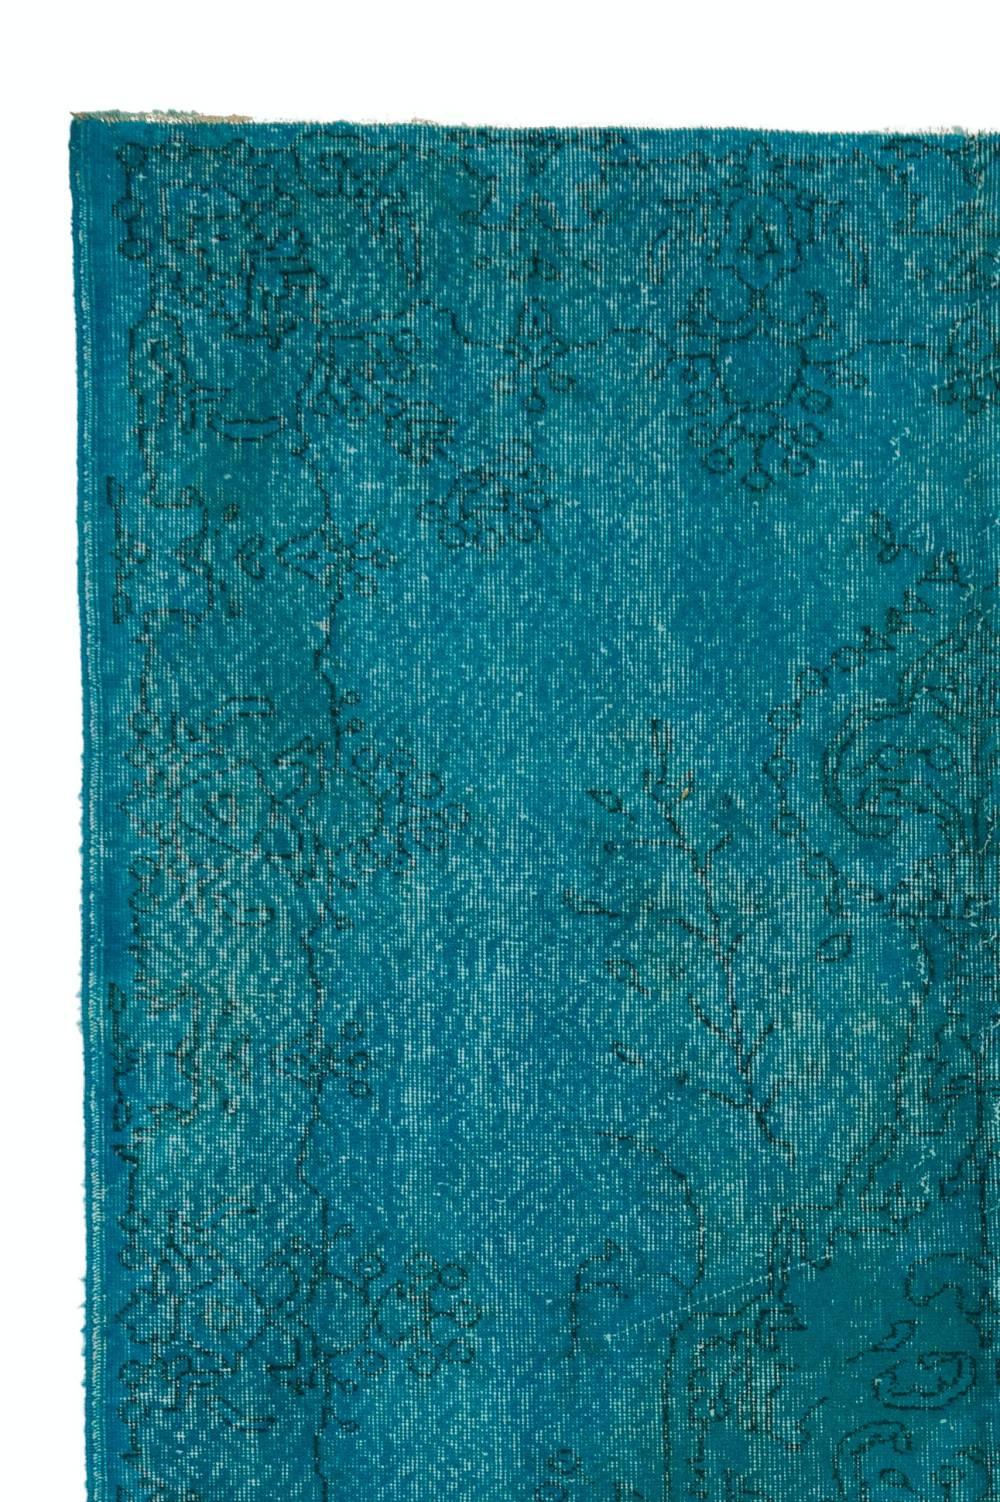 A vintage Turkish area rug re-dyed in turquoise blue color. Measures: 6 x 9.4 Ft
Finely hand knotted, low wool pile on cotton foundation. Deep washed.
Sturdy and can be used on a high traffic area, suitable for both residential and commercial